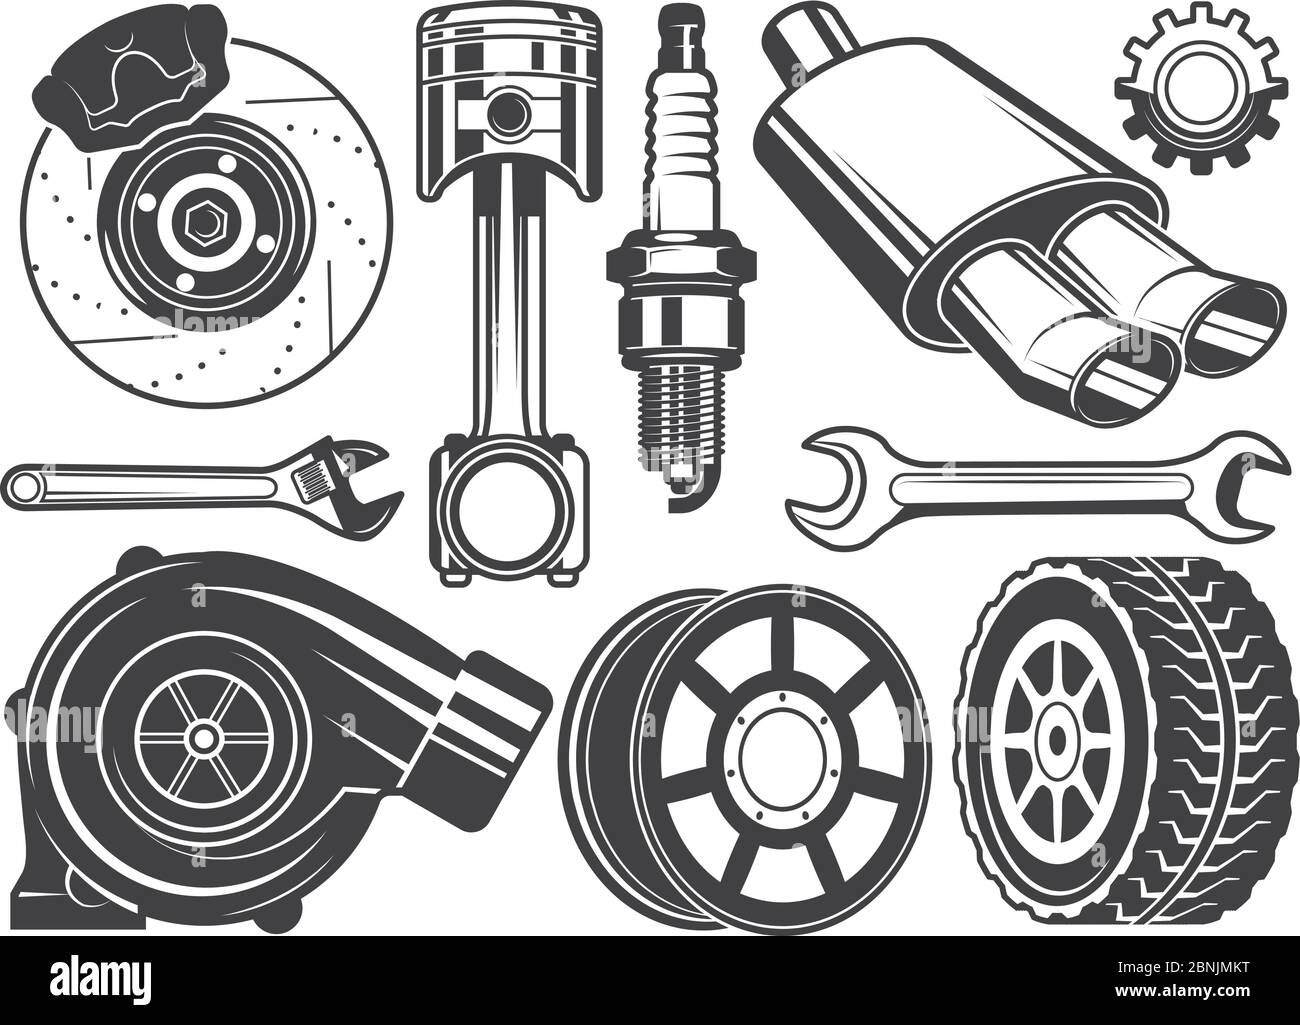 Monochrome pictures of engine, turbocharger cylinder and other automobile tools Stock Vector